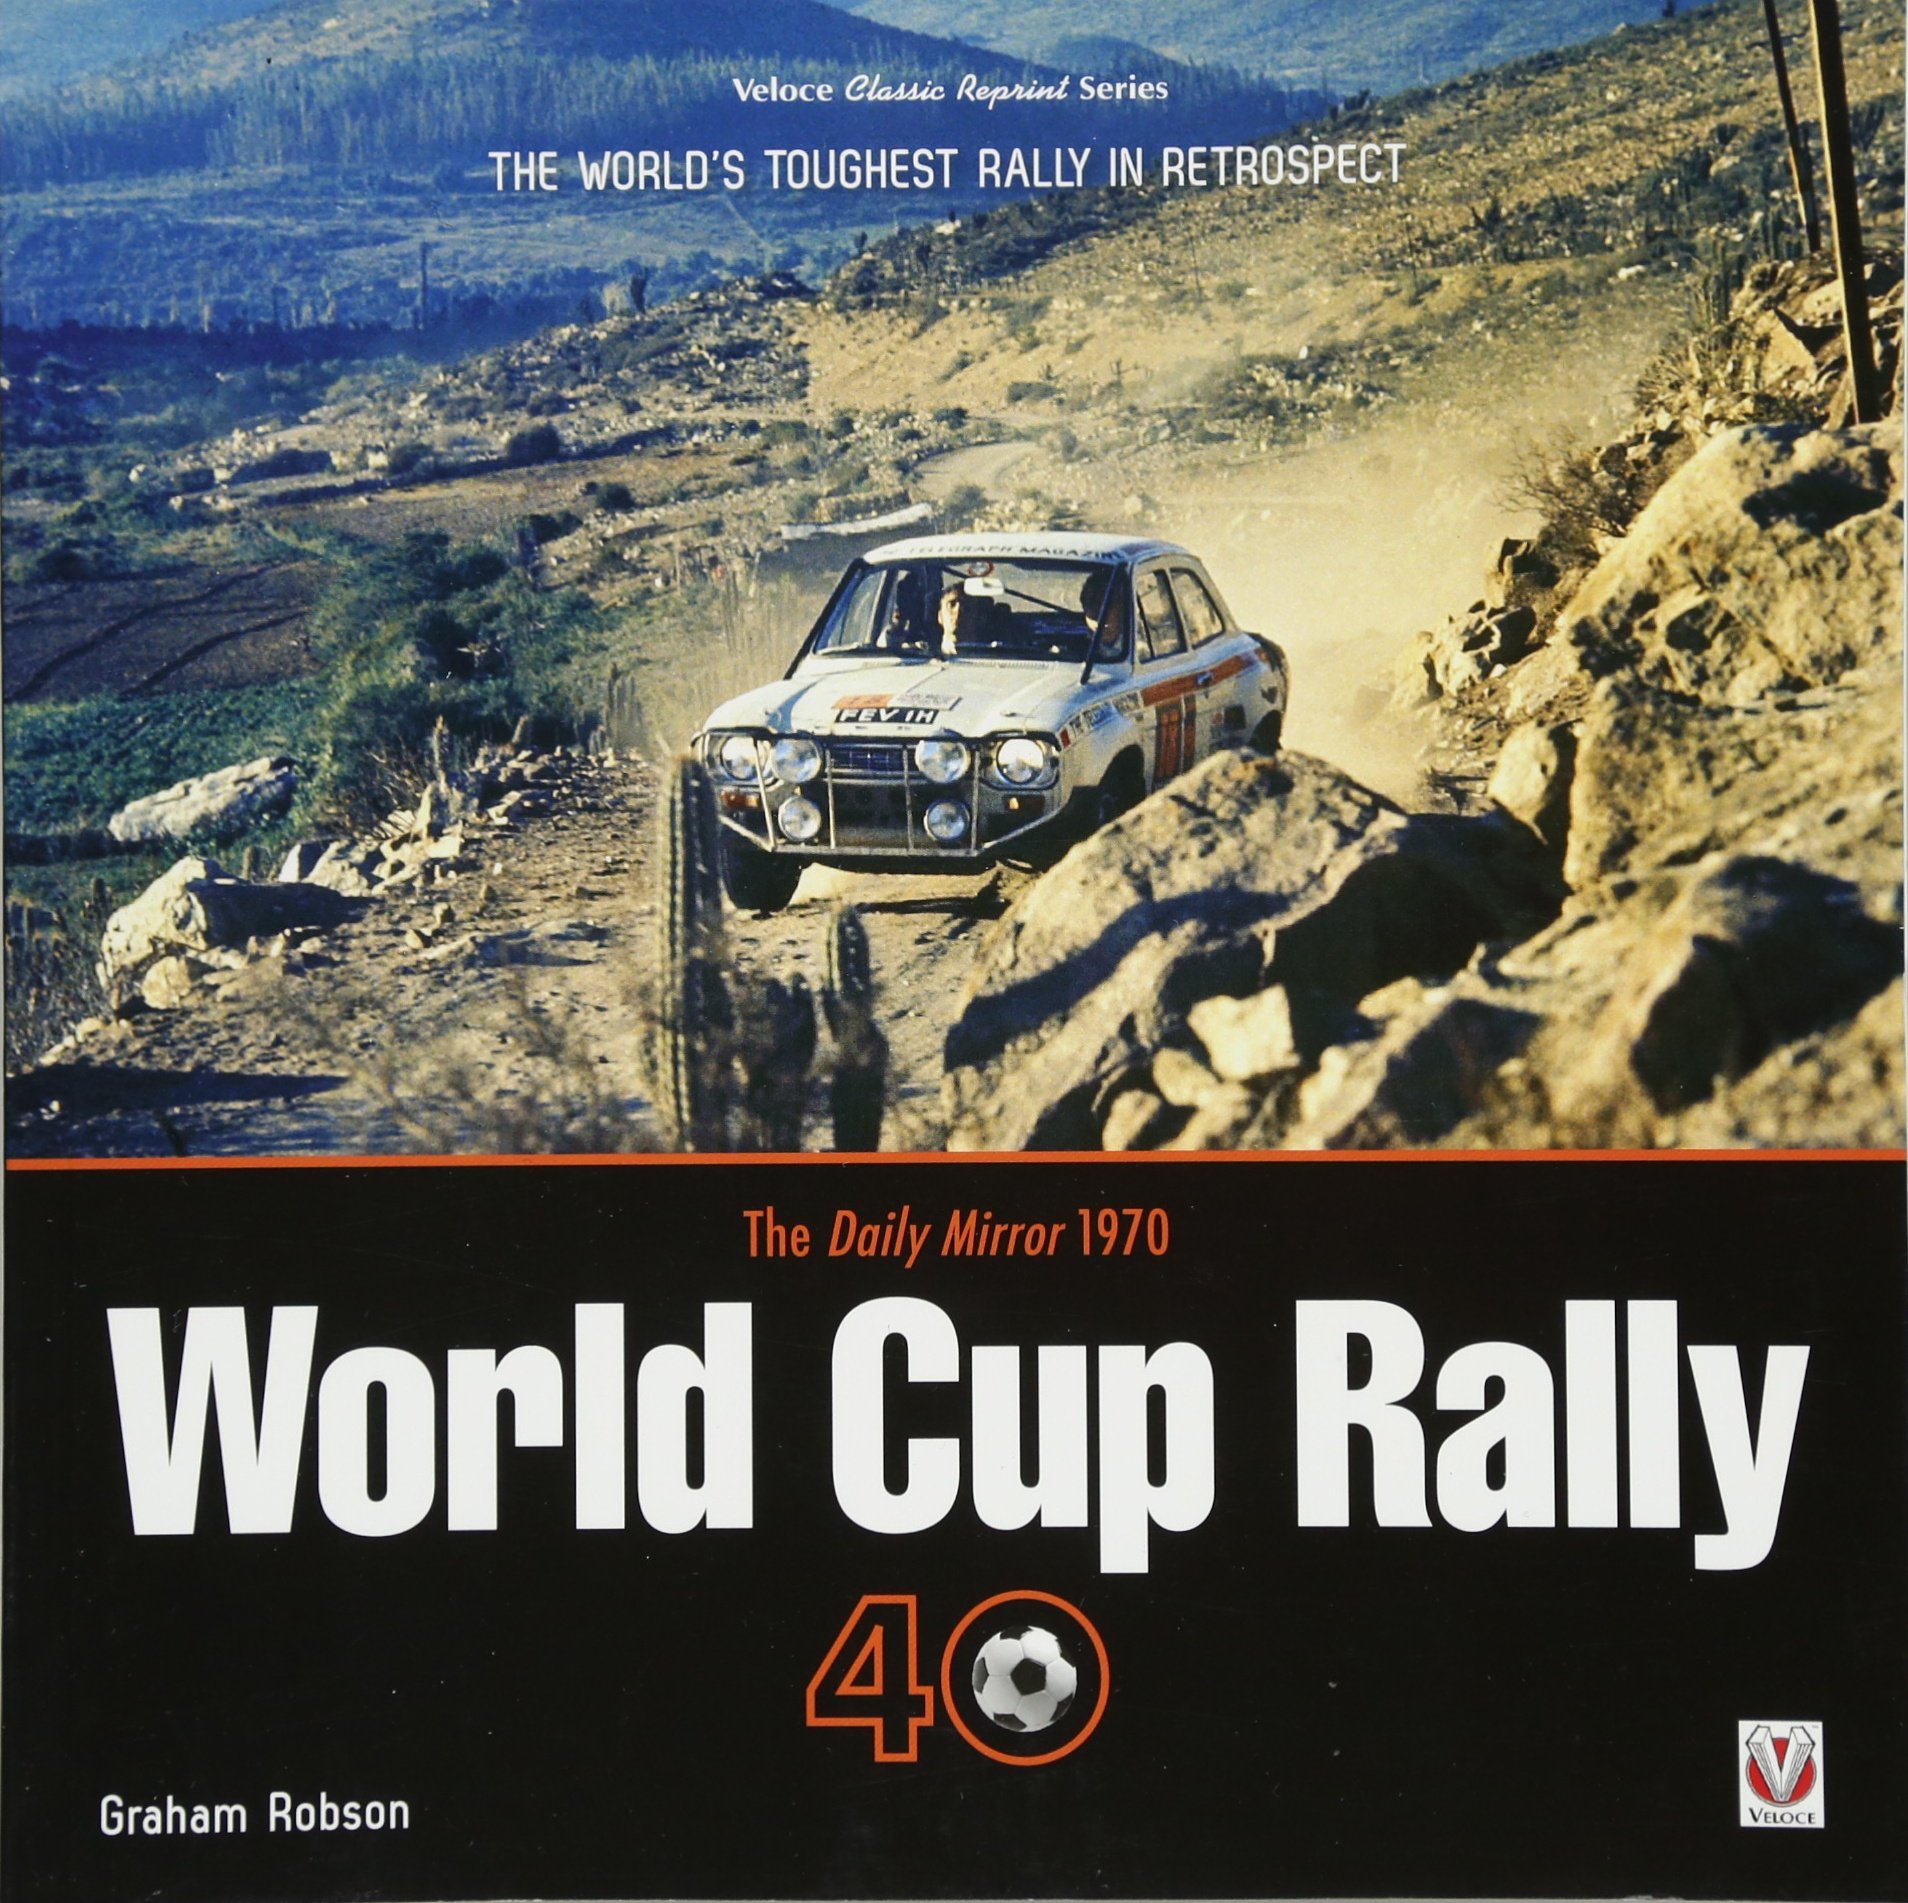 THE DAILY MIRROR 1970 - WORLD CUP RALLY 40